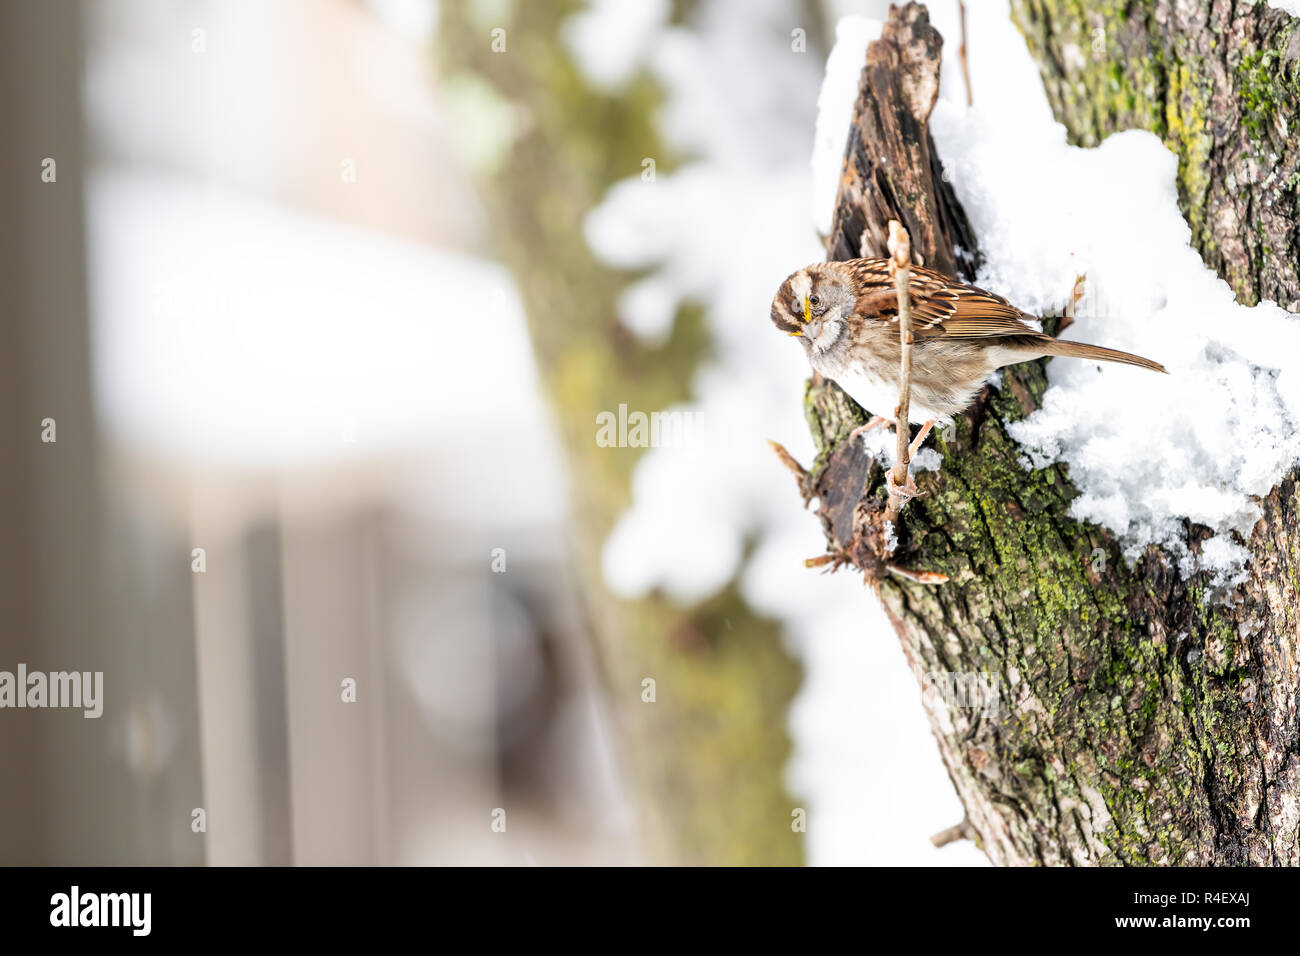 Closeup of one fluffed, puffed up sparrow bird perched on cherry tree branch, trunk covered in falling snow with buds during heavy snowing, snowstorm, Stock Photo